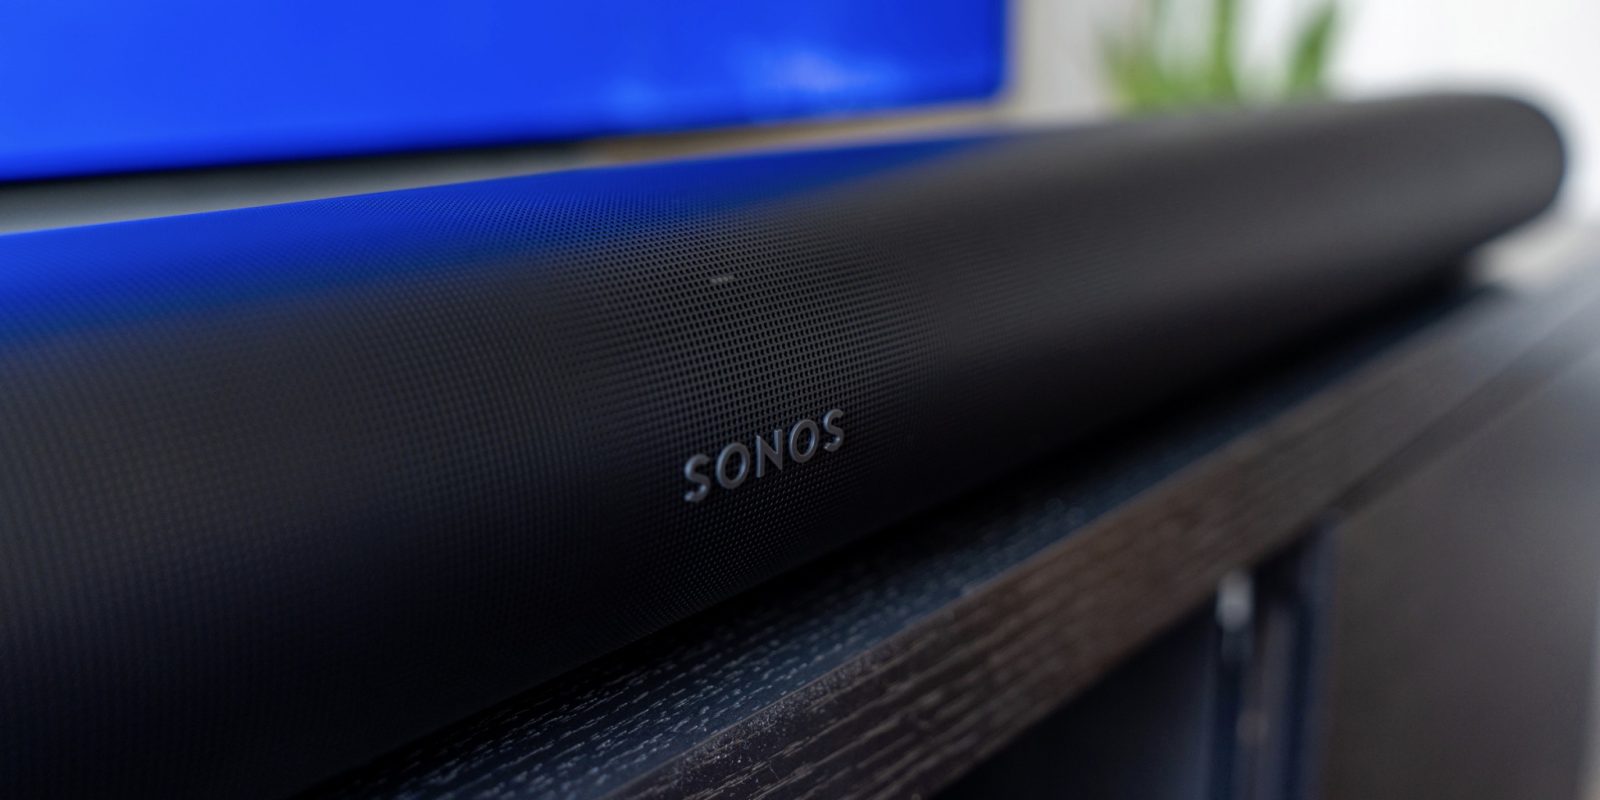 sonos-arc-atmos-airplay-2-soundbar Kick Start Your Smart Home With 2021’s Must-Have Home Automation Devices